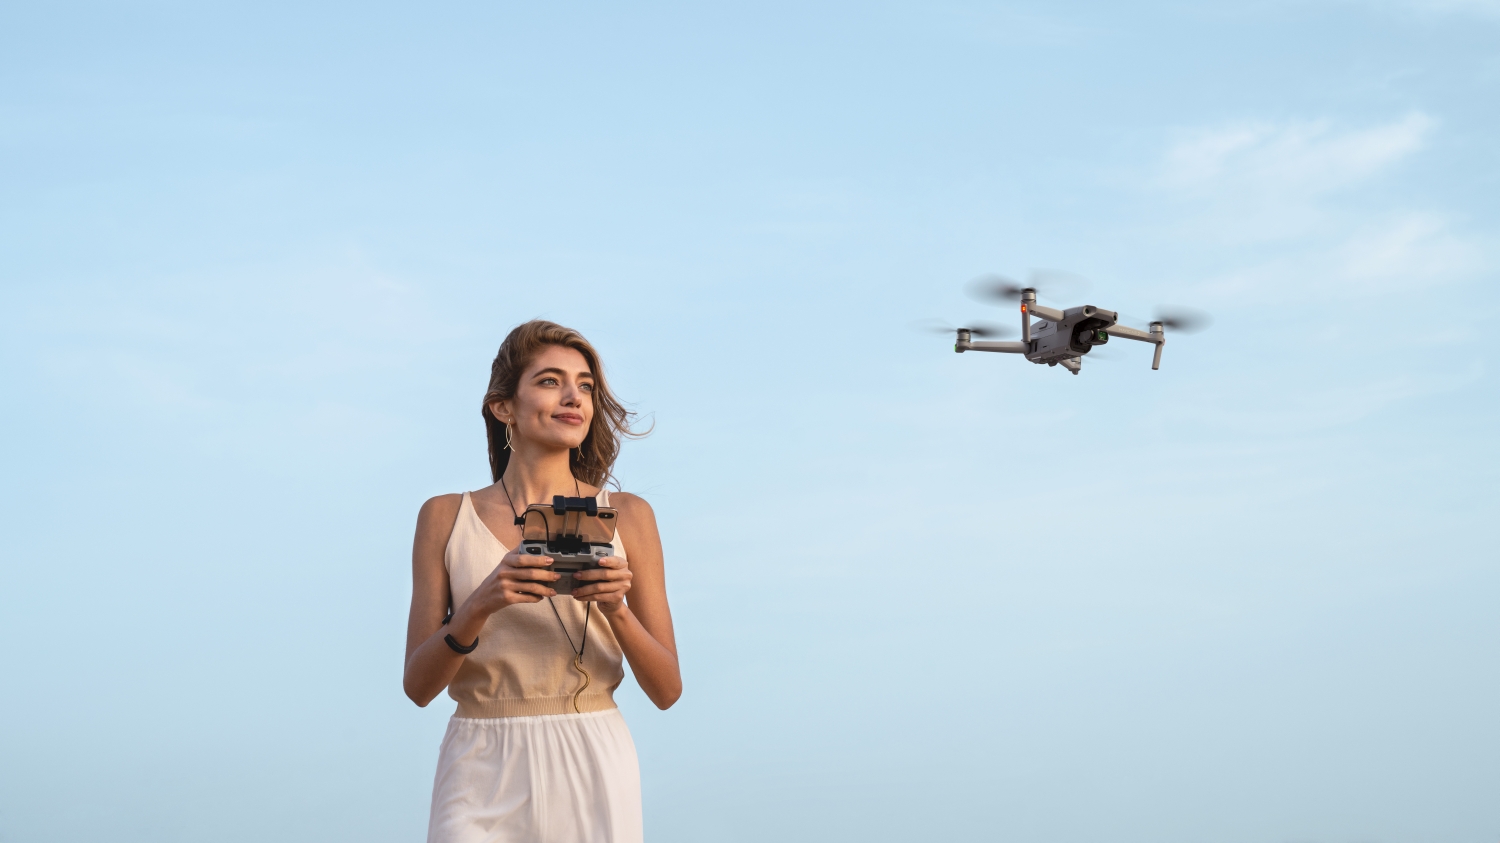 dji mavic air 2 news specs release press lifestyle images 1 of 4